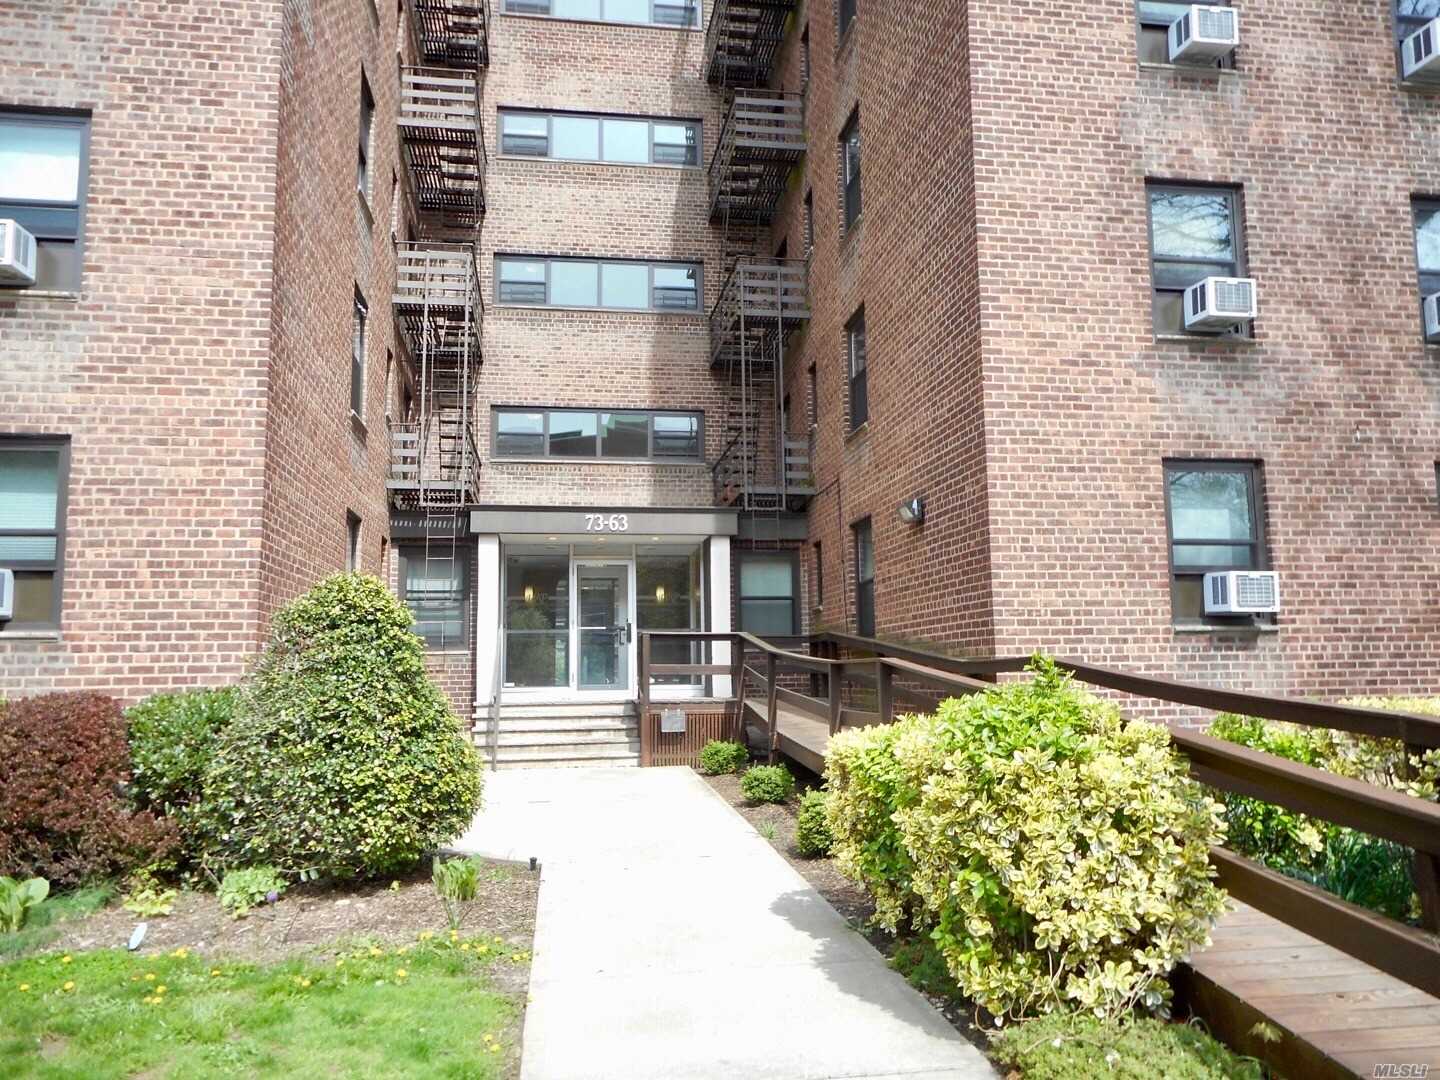 Great value to renovate this huge one bedroom coop in the beautiful Windsorpark ! Bright and sunny corner unit face east and south in the back of the building. Many closets. Low maintenance at $654 including cooking gas. New windows and two brand new ACs.Private parking lot available immediately for a fee. Walk to many buses and express bus. Won&rsquo;t last! Call or text to see it today! **Sold As Is**